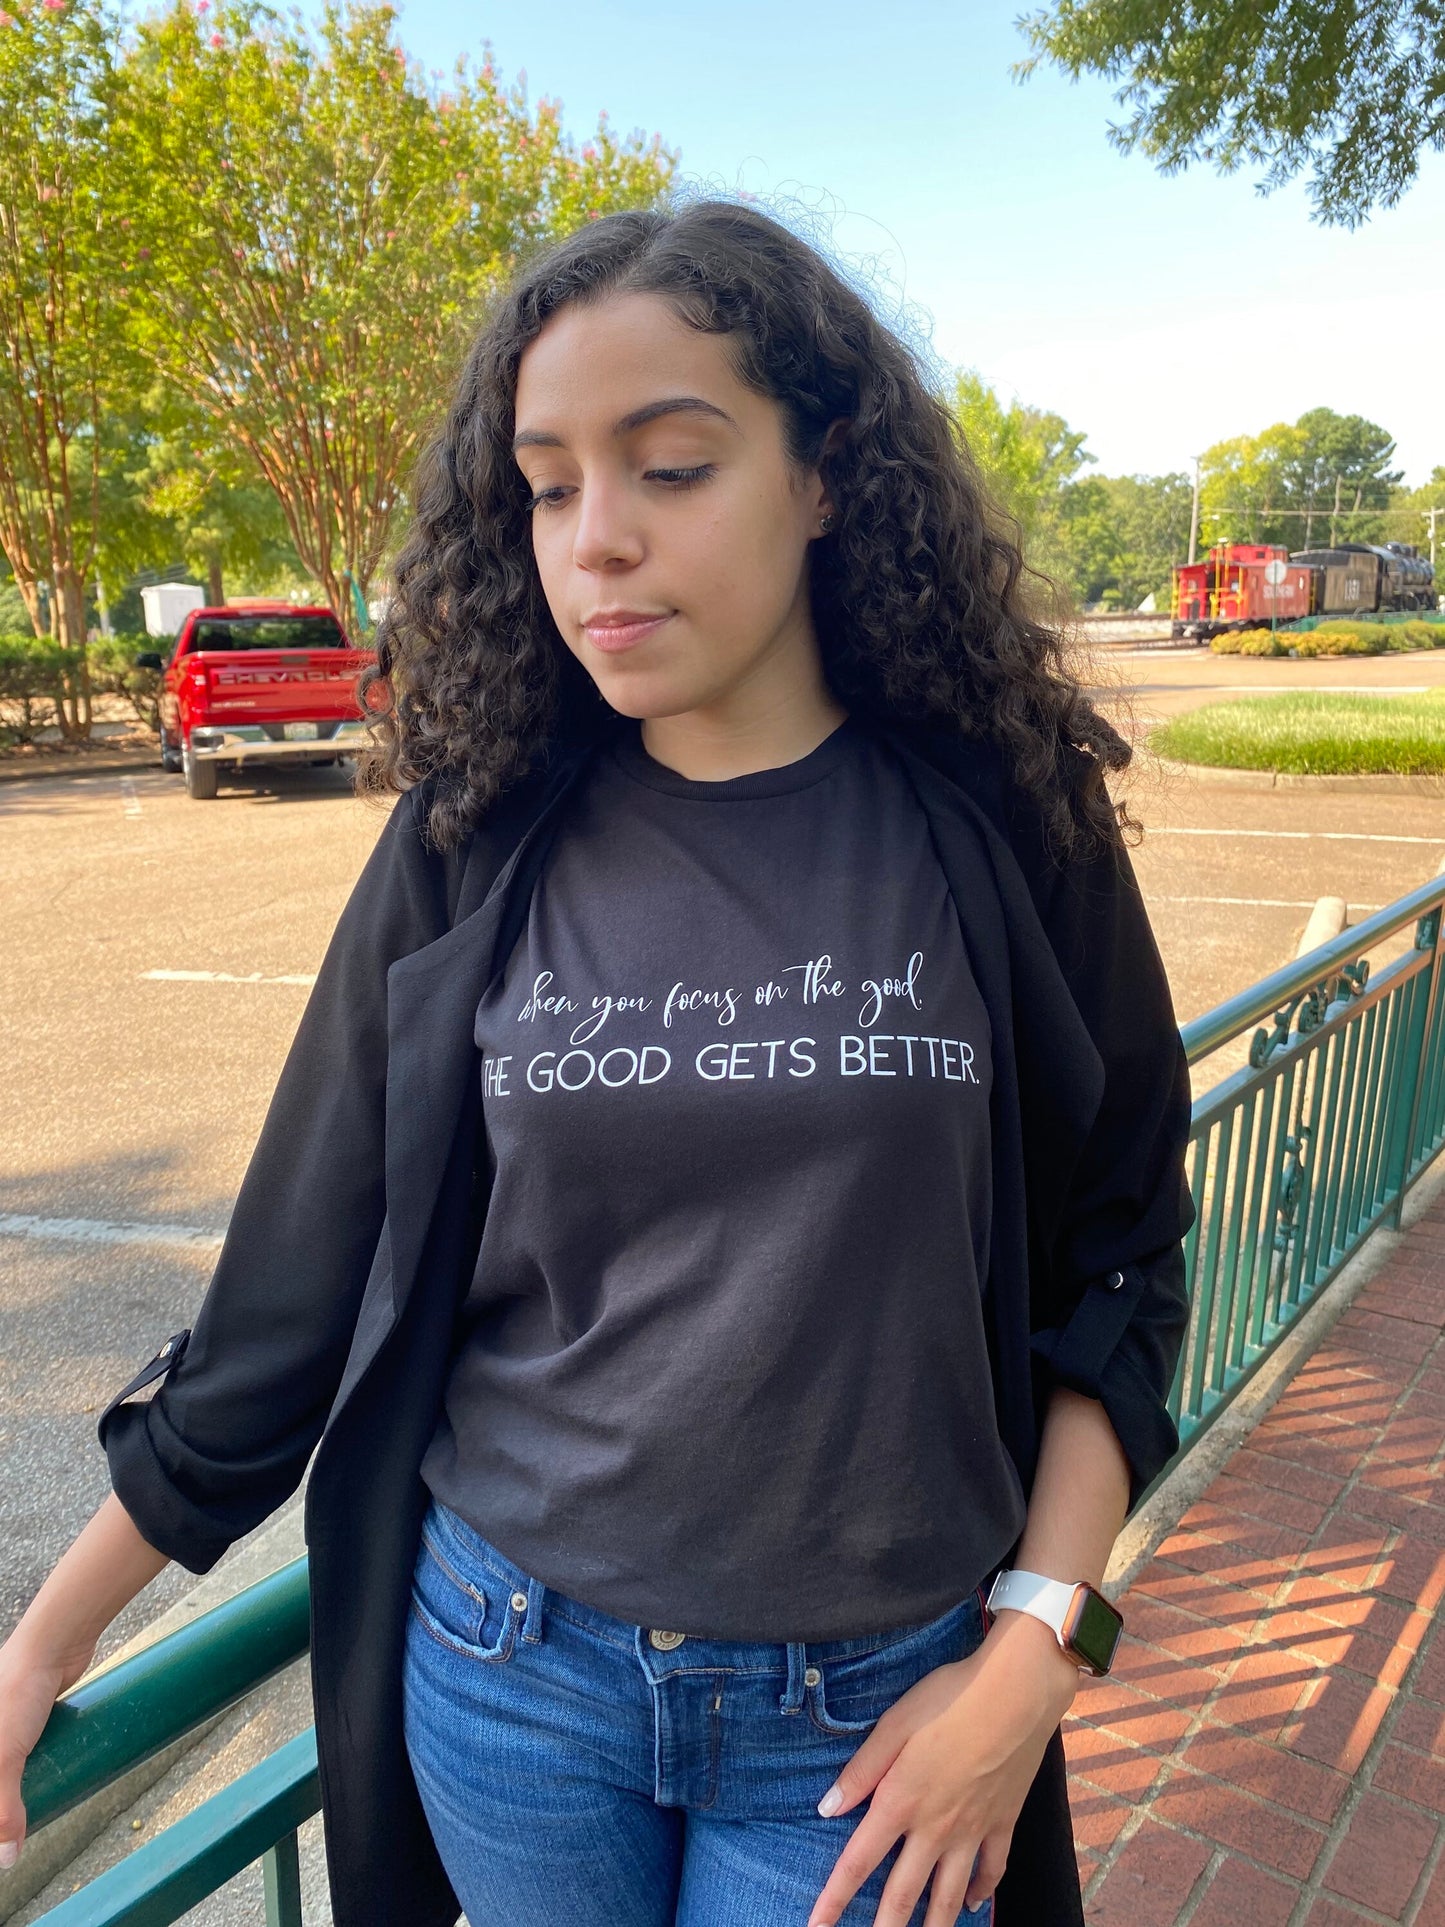 When you focus on the good, the good gets better T-shirt - Unisex HTV - 100% organic Cotton T-Shirt - Positive Quote T-shirt - Fall Fashion